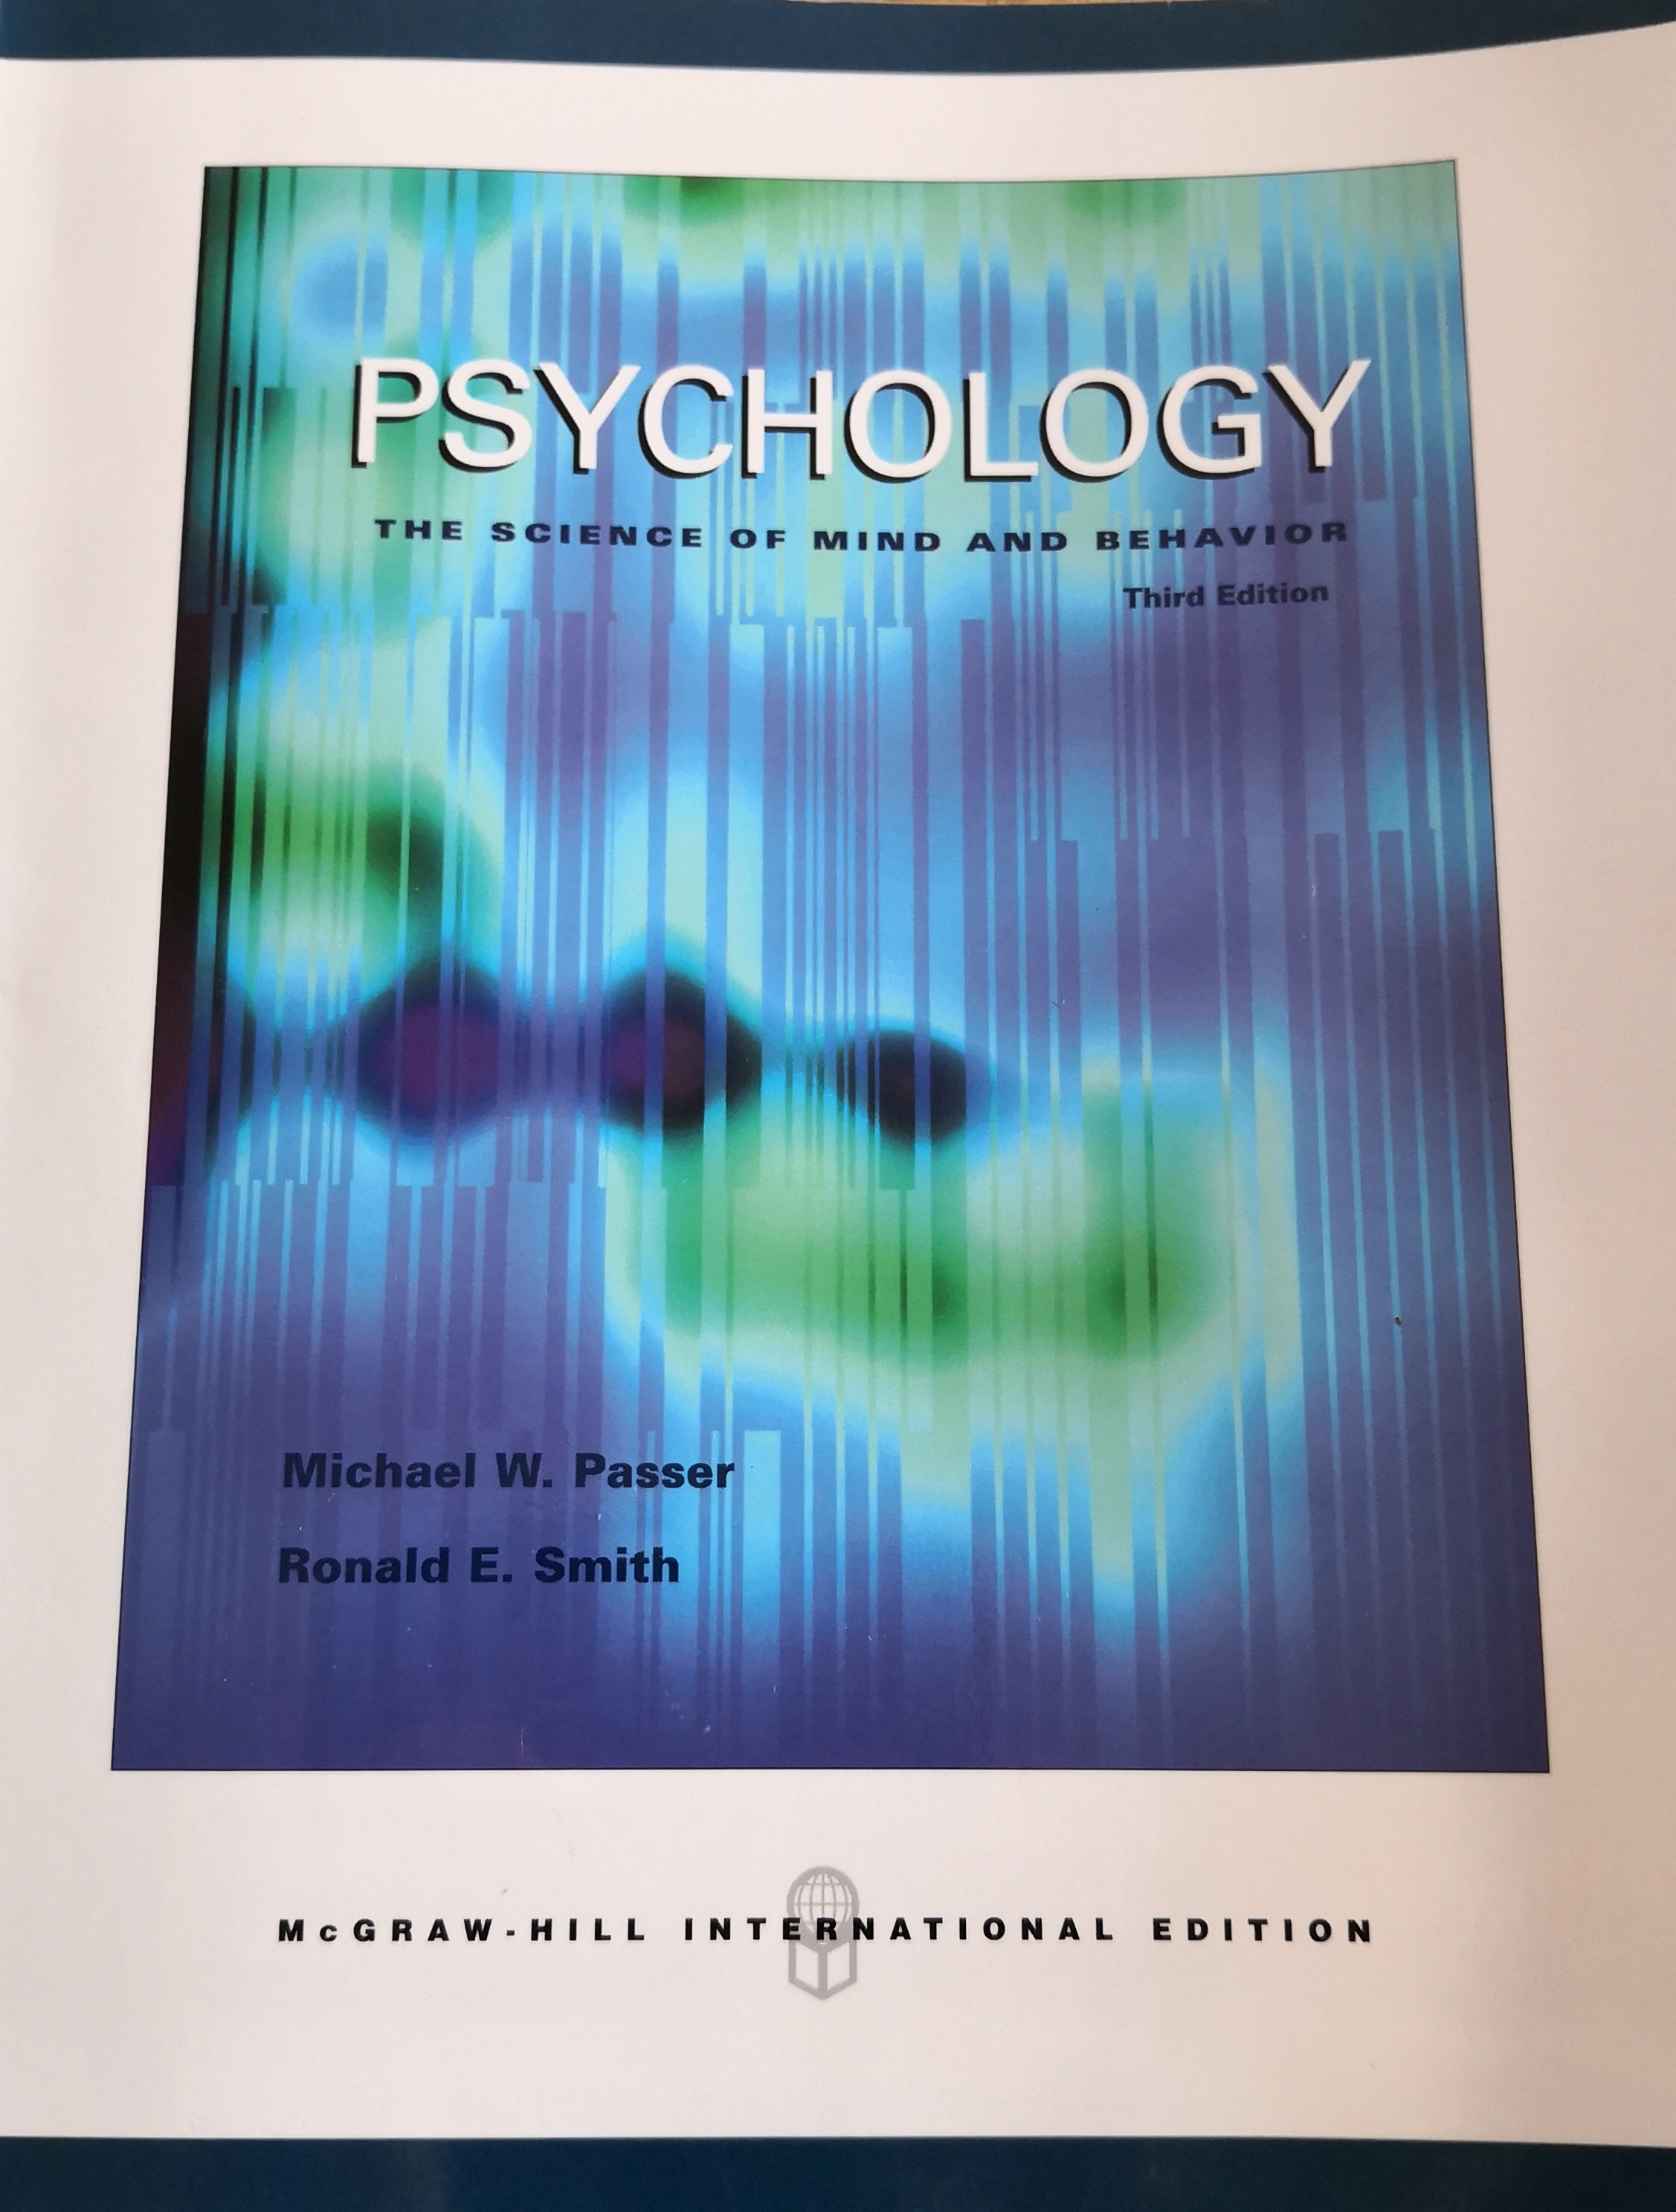 Psychology - the science of mind and behavior; Michael W. Passer, Ronald Edward Smith; 2007